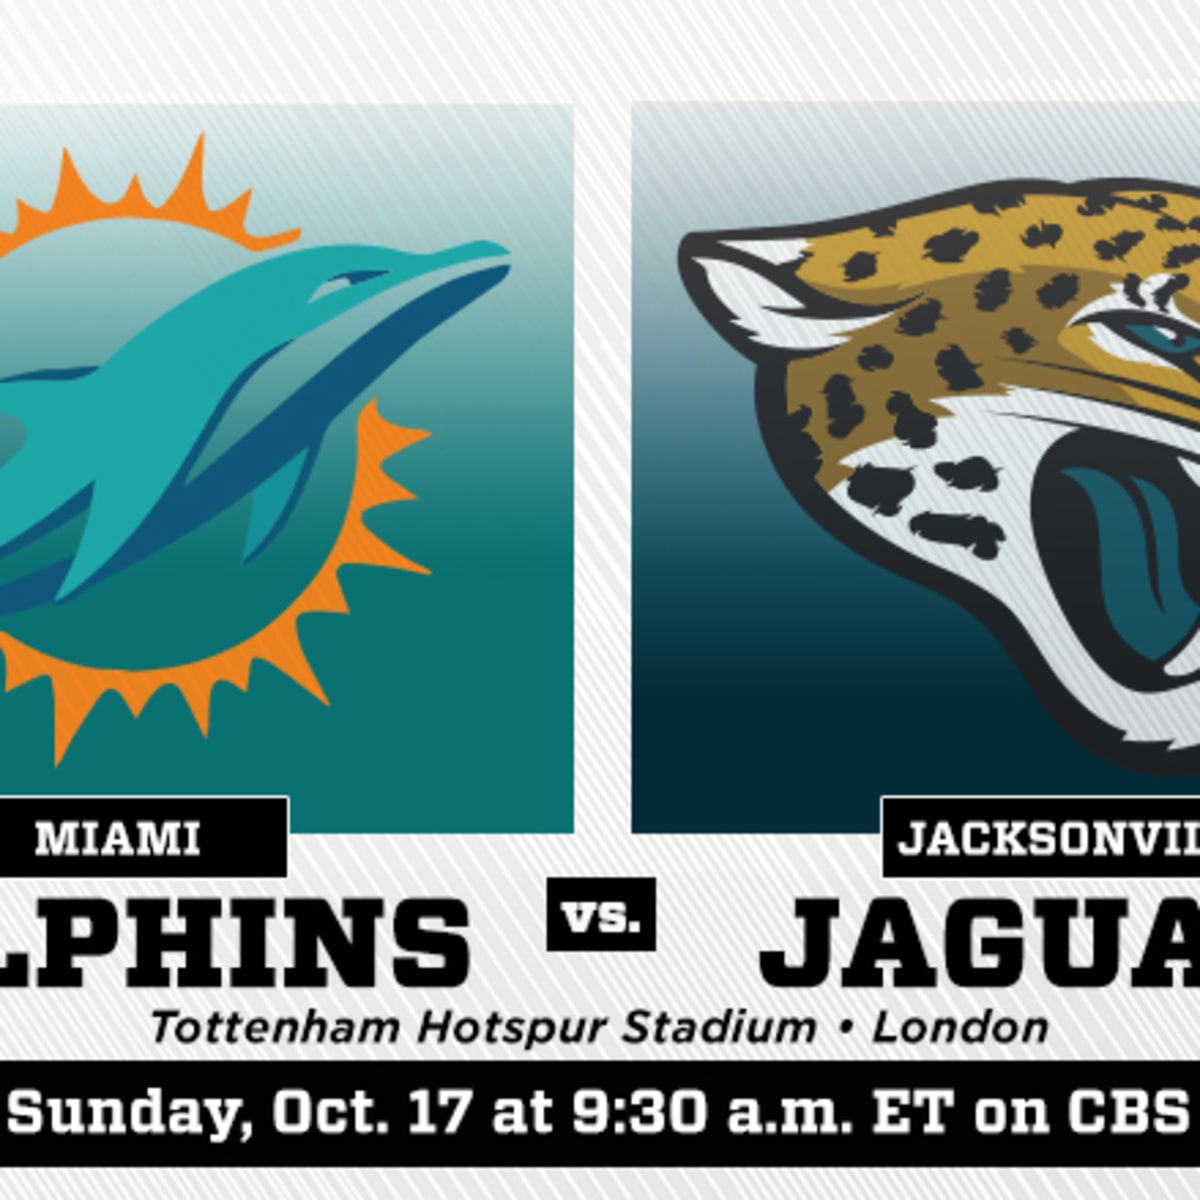 Take Points with Dolphins vs Unbeaten Jaguars